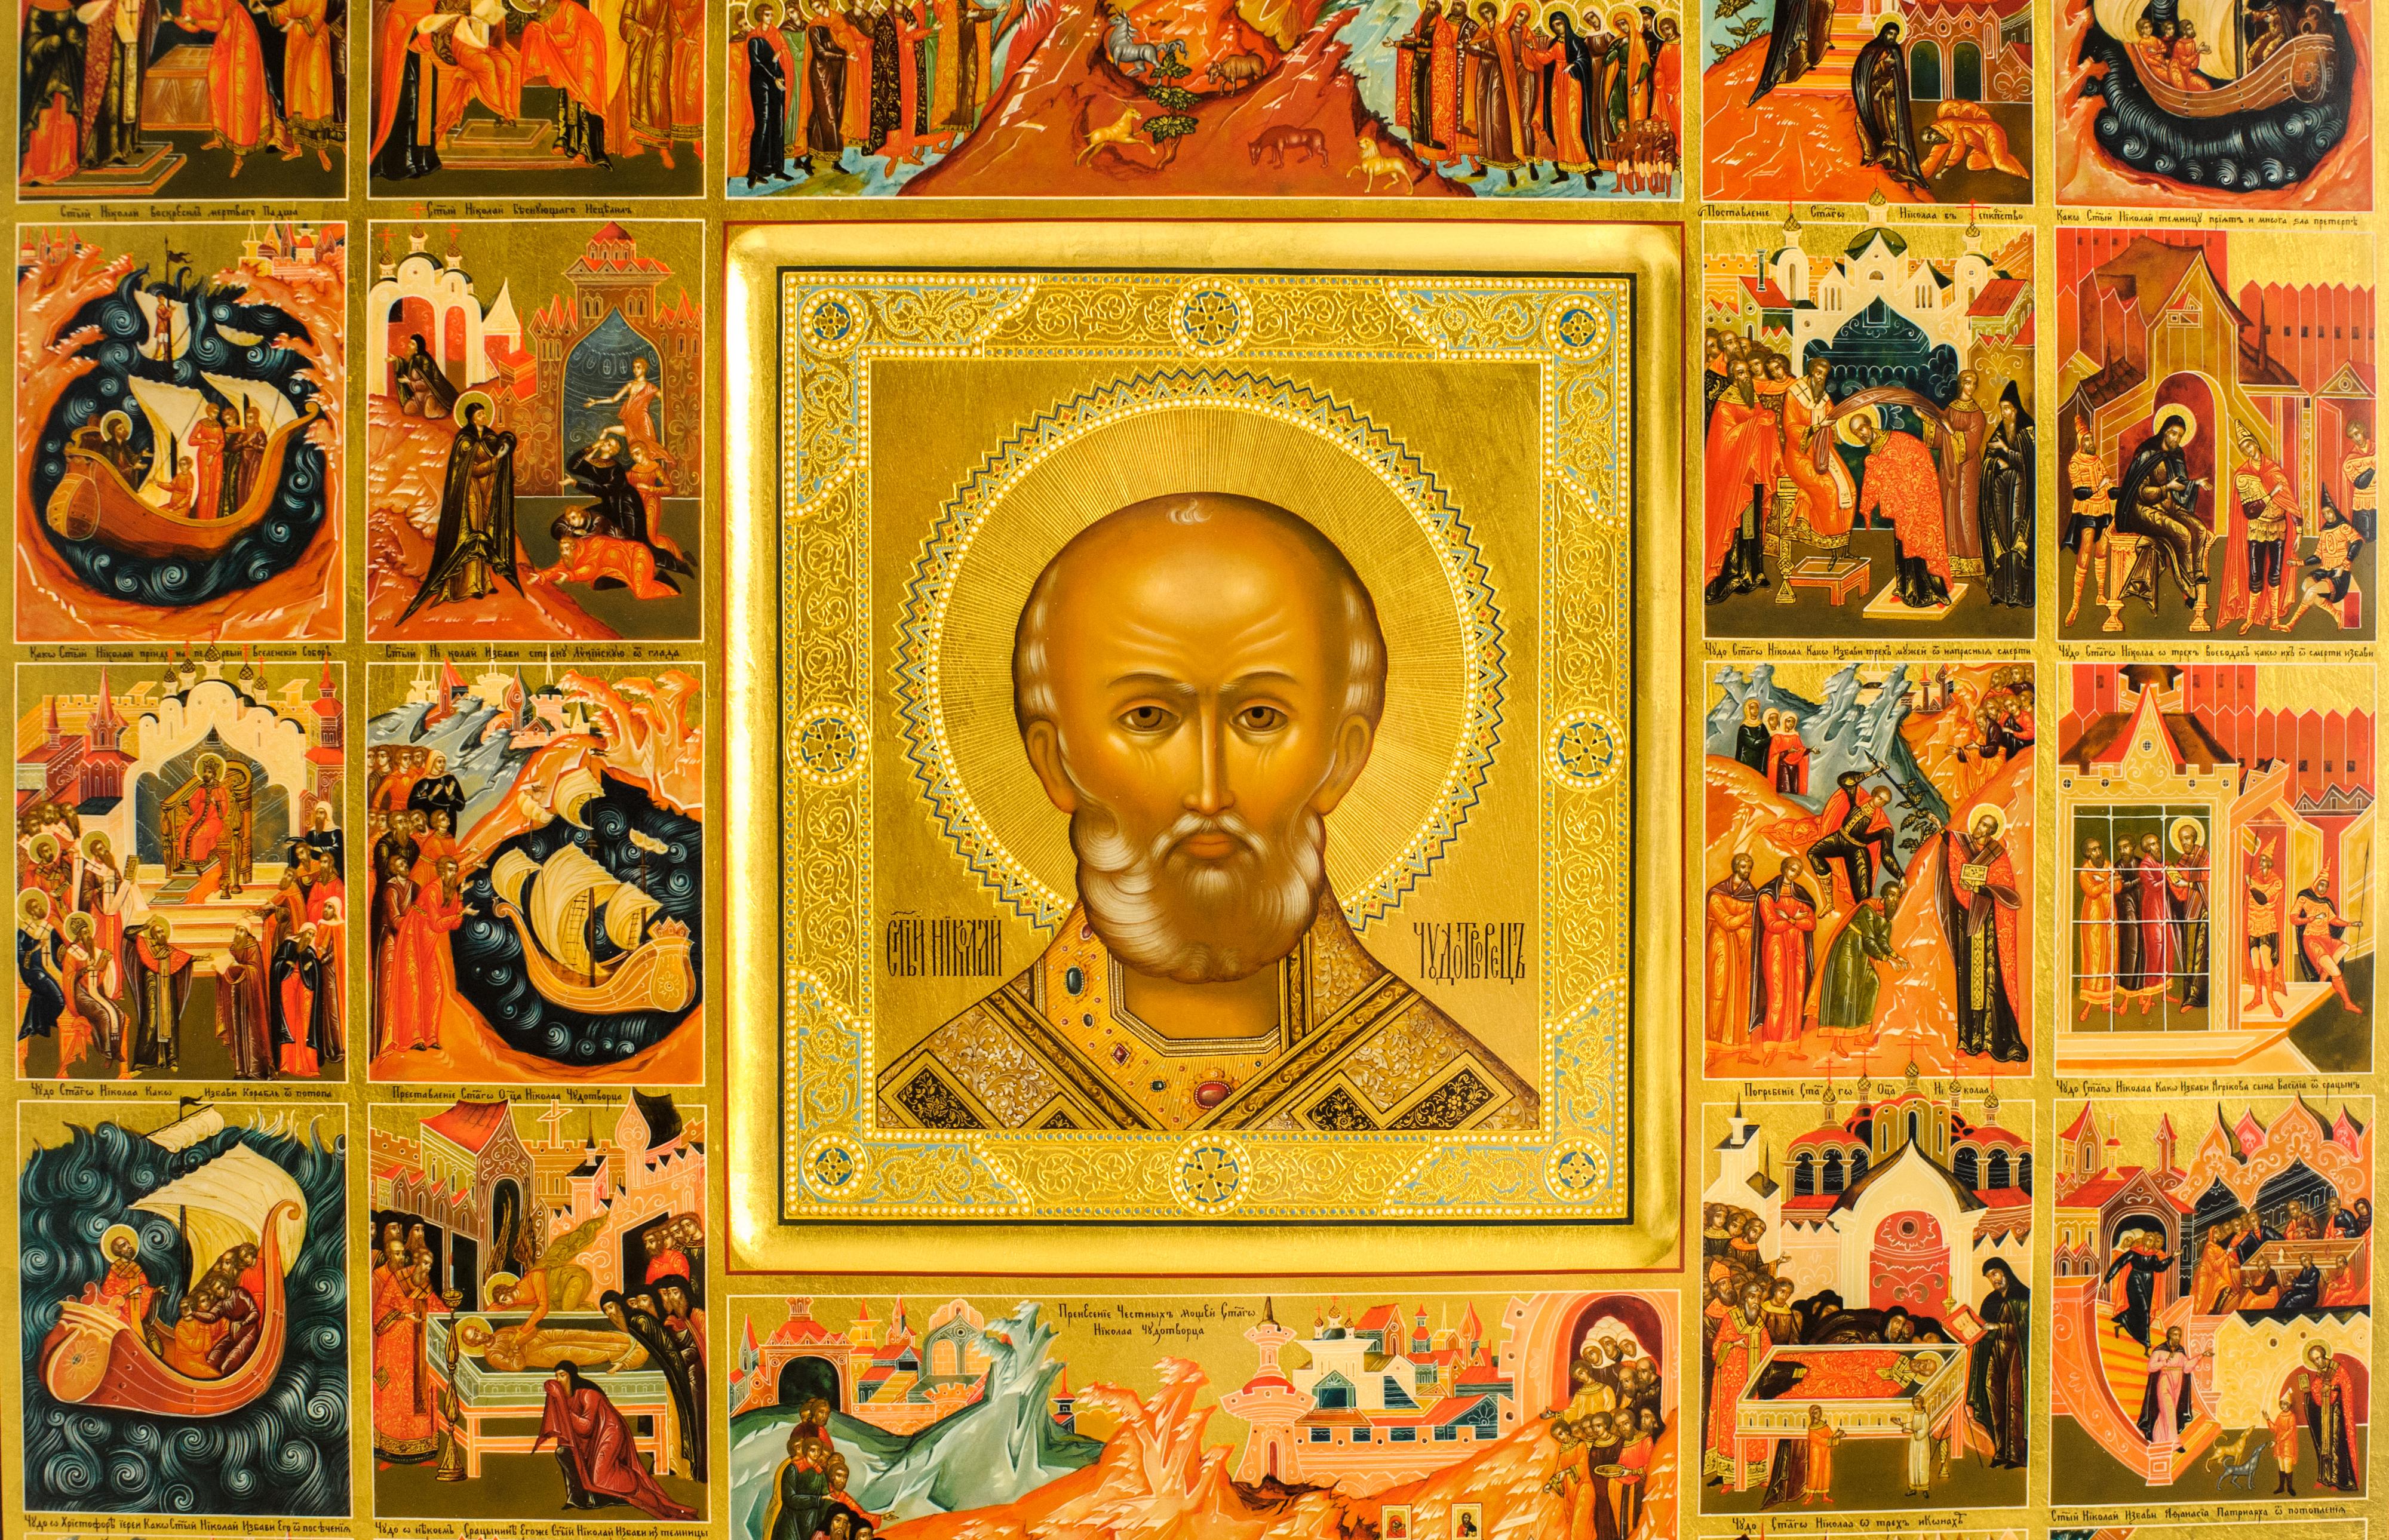 Contemporary reproduction (historic reconstruction) of famous 18th century Russian orthodox icon from the State Museum of Palekh Art, Russia.
Central part, Saint Nicolas surrounded by 38 holy stories.
Exquisite and a truely extraordinary piece of